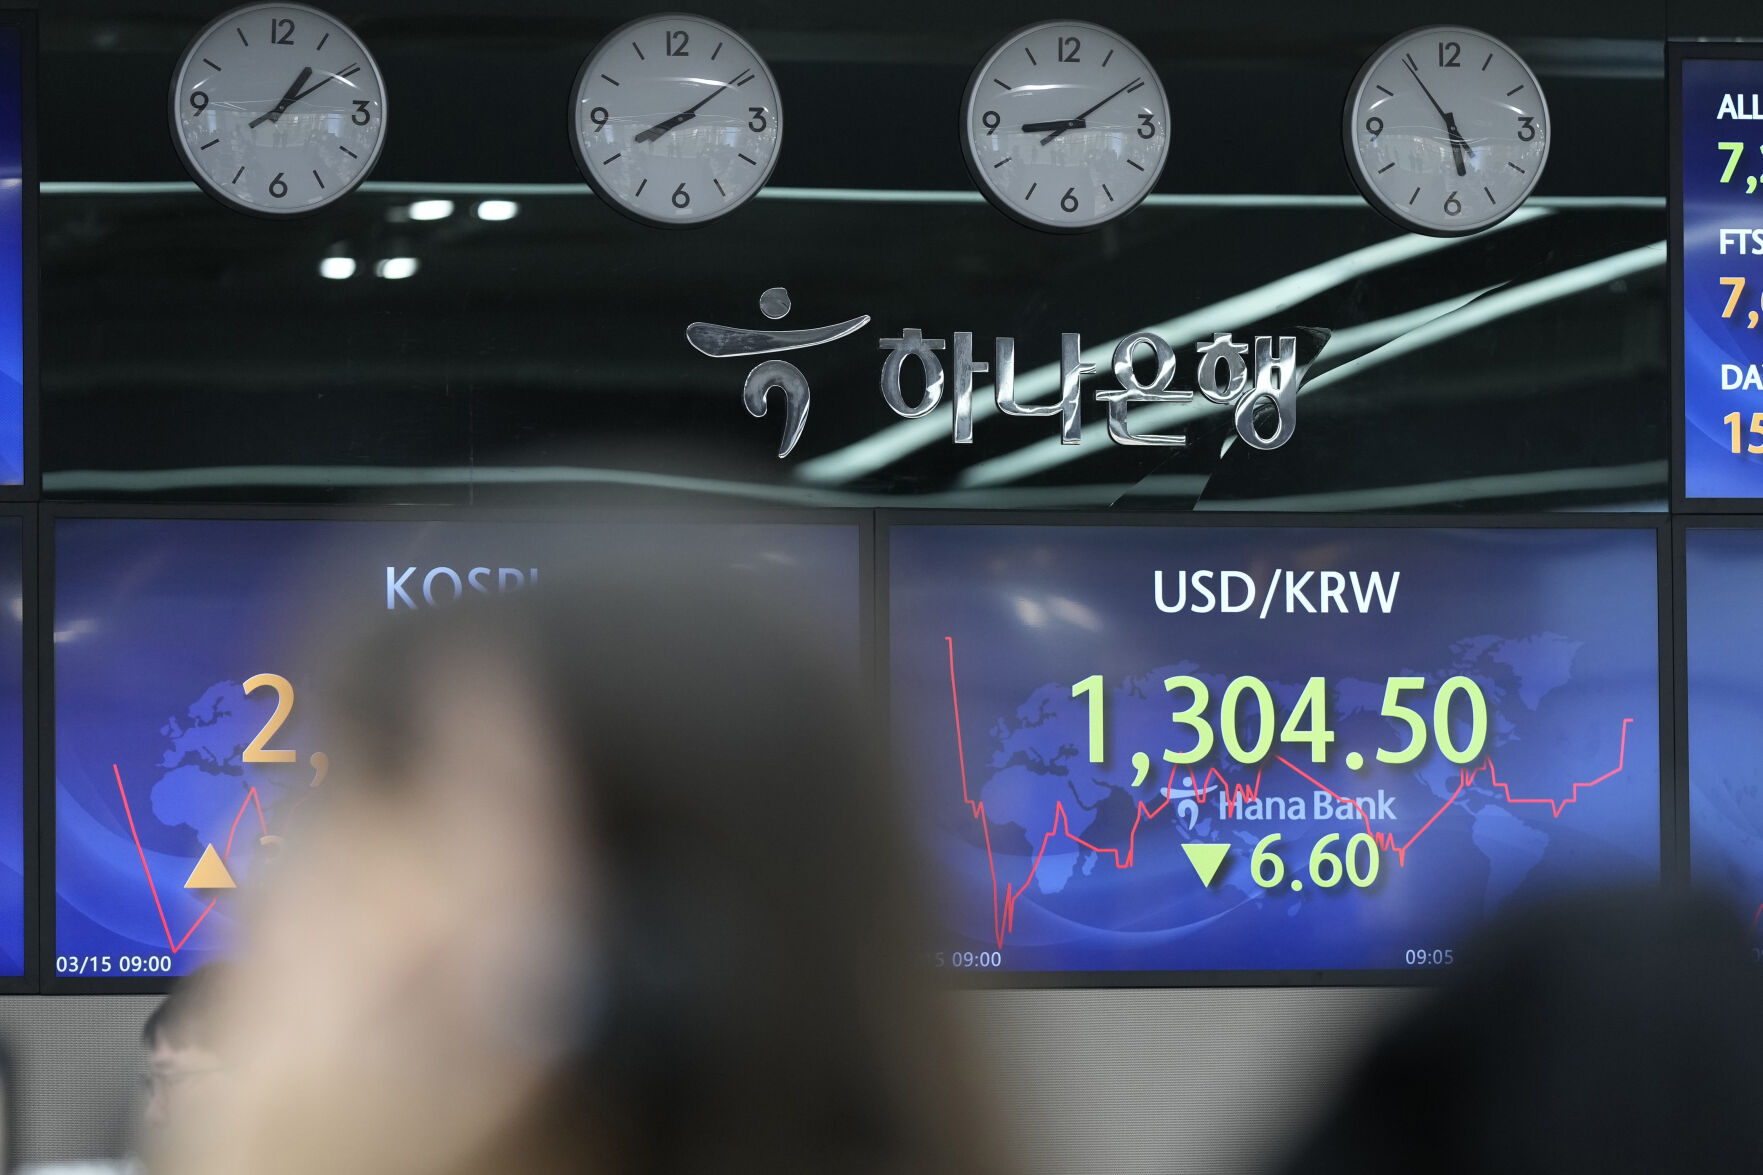 <p>A currency trader talks on the phone near the screen showing the foreign exchange rate between U.S. dollar and South Korean won at a foreign exchange dealing room in Seoul, South Korea, Wednesday, March 15, 2023. Asian stock markets rebounded Wednesday after Wall Street stabilized following sharp declines for bank stocks and U.S. inflation eased but stayed high. (AP Photo/Lee Jin-man)</p>   PHOTO CREDIT: Lee Jin-man 